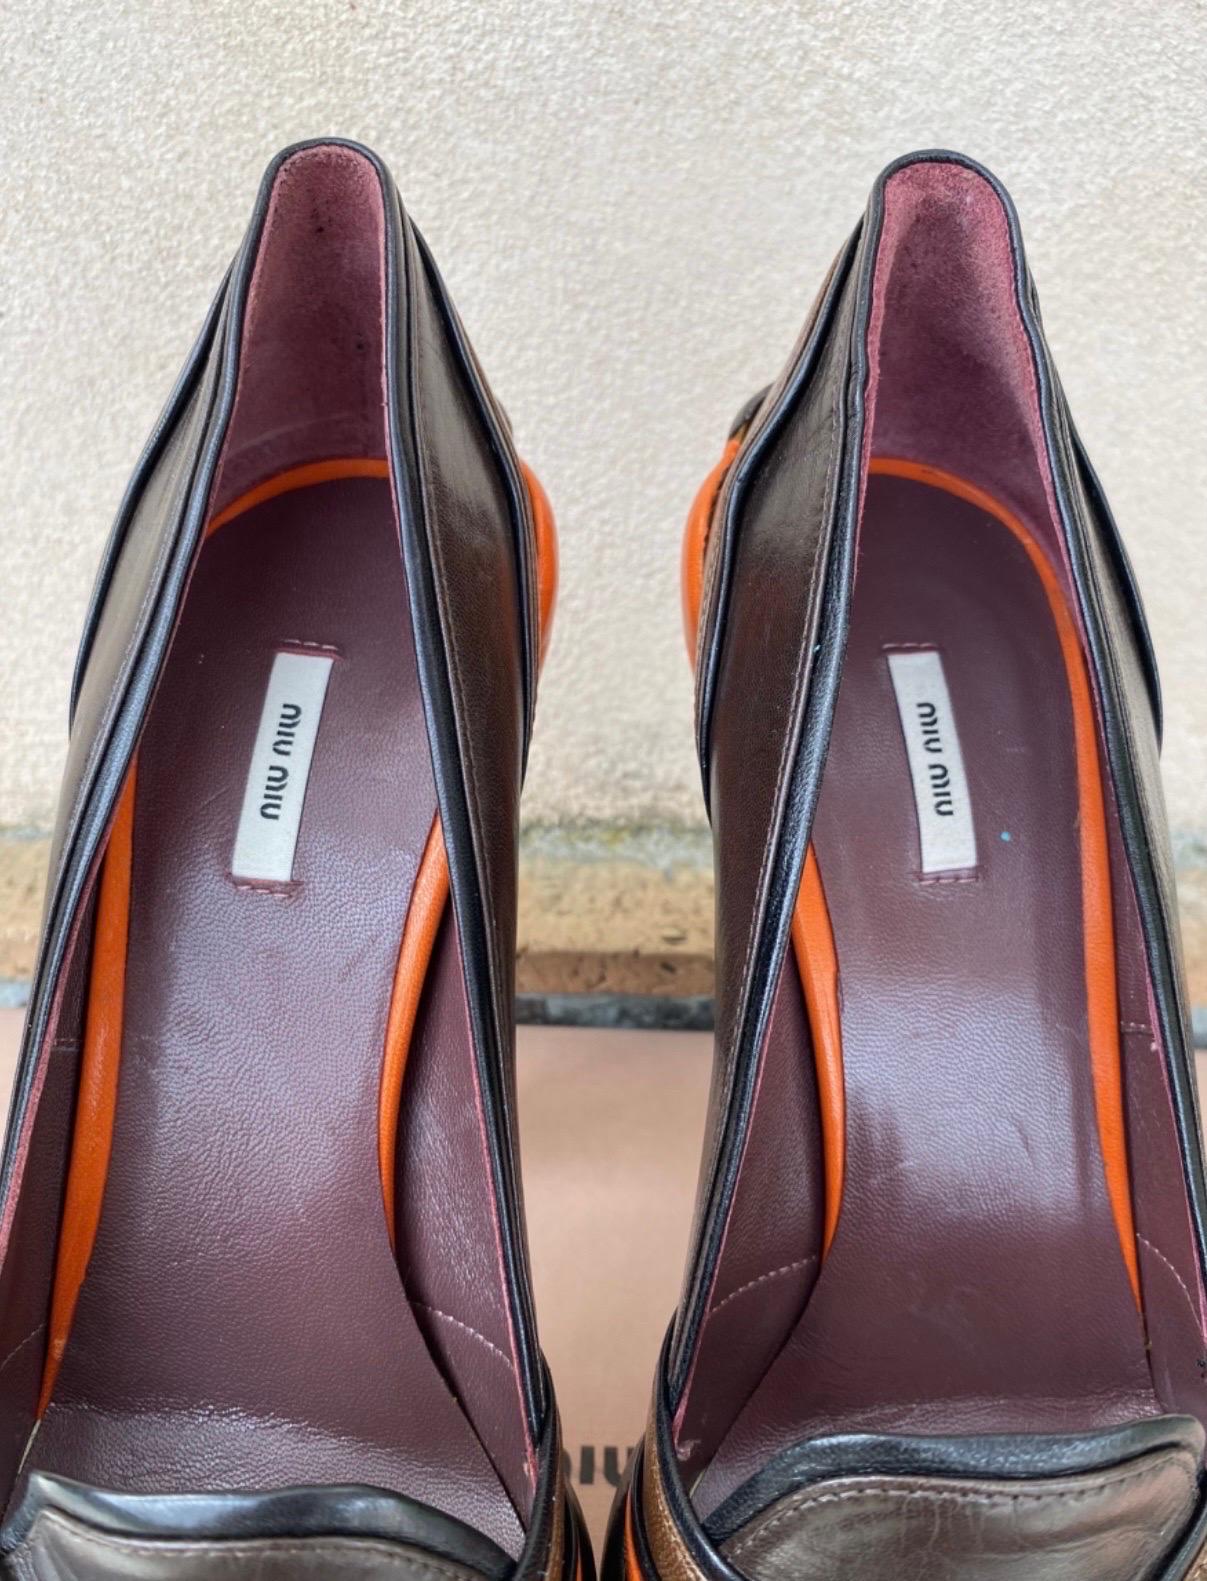 Miu Miu platform heel. 
Collection Fall 2008 RTW.
Featuring two different brown shades and orange details. Size 39. dimensions: heel 14 cm, insole 25 cm, some signs of wear as shown in the photos but good condition overall. They come with original